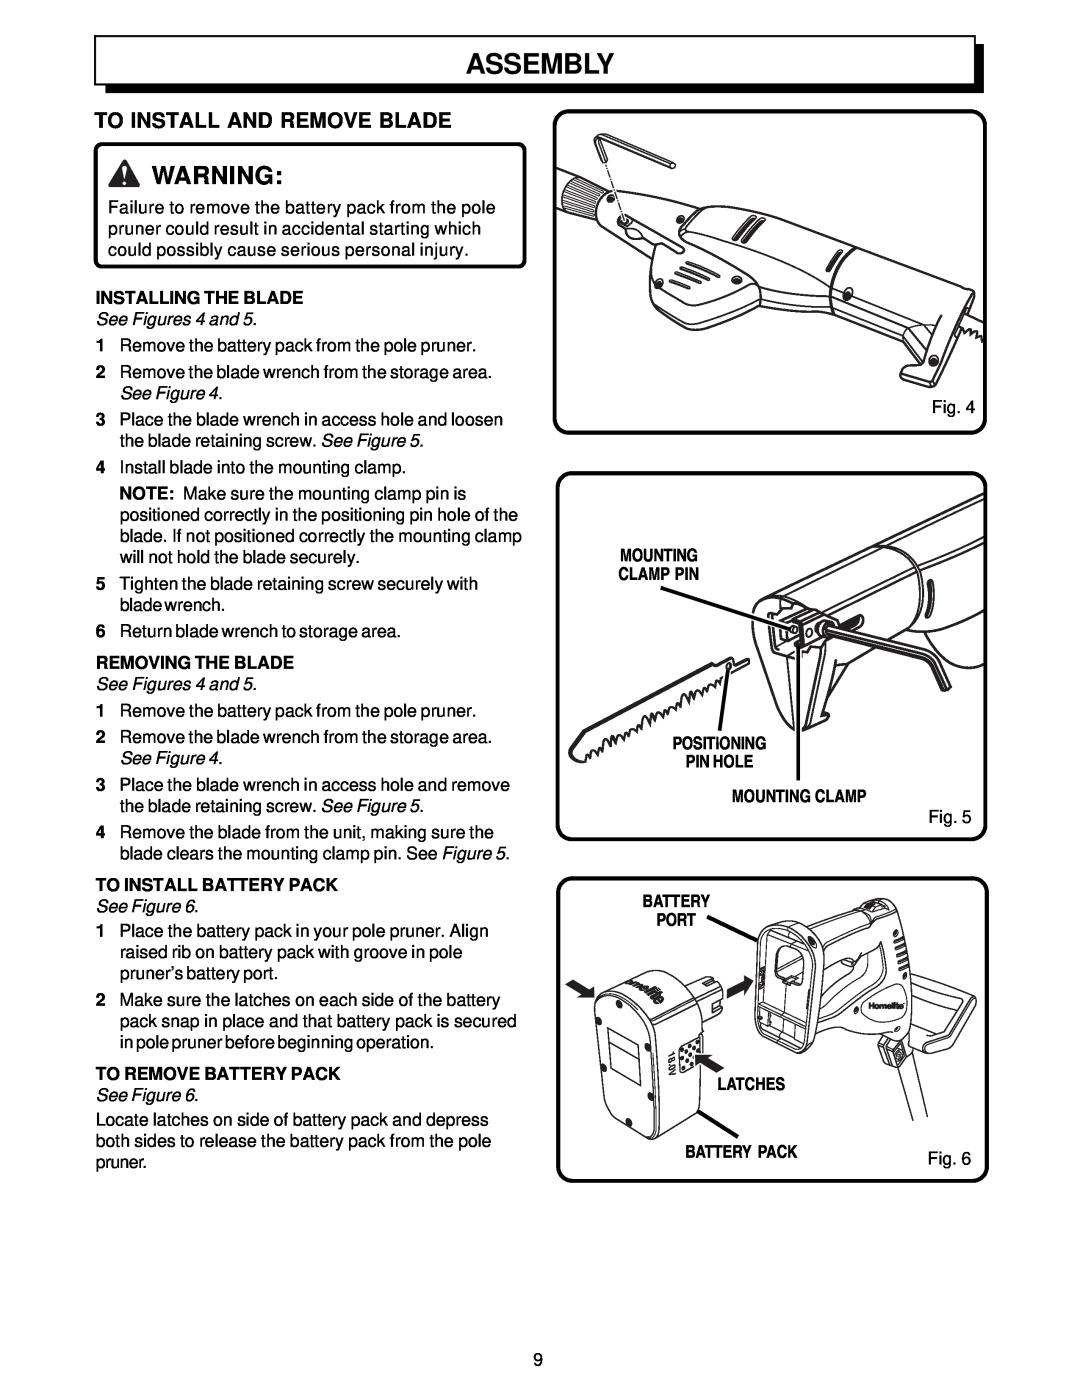 Homelite UT34020 manual Assembly, To Install And Remove Blade, Installing The Blade, See Figures 4 and, Removing The Blade 